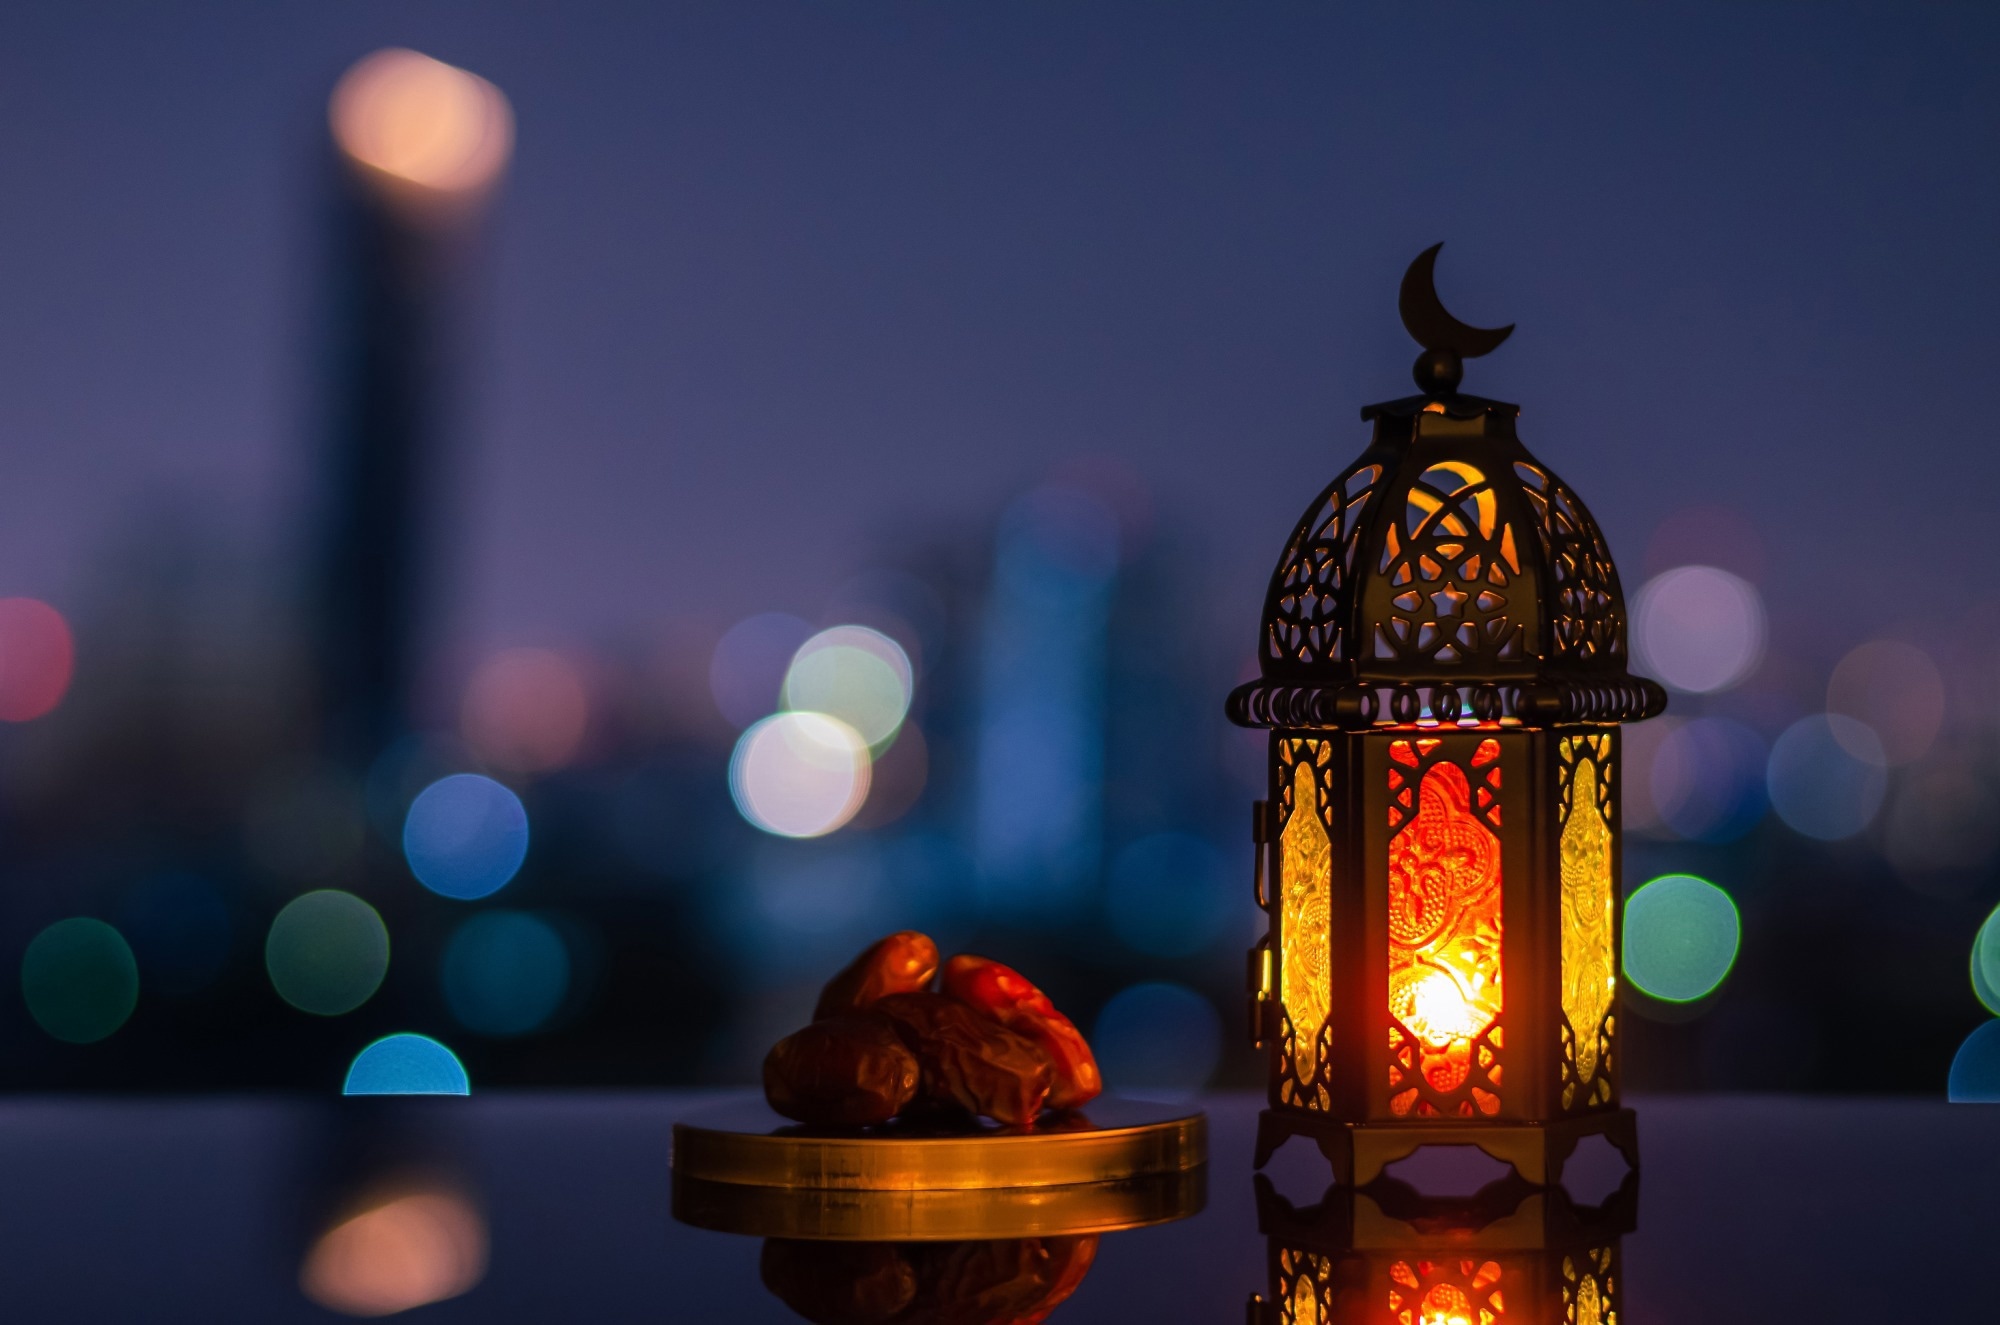 Study: Effects of Ramadan intermittent fasting on gut microbiome: is the diet key? Image Credit: Baramyou0708 / Shutterstock.com